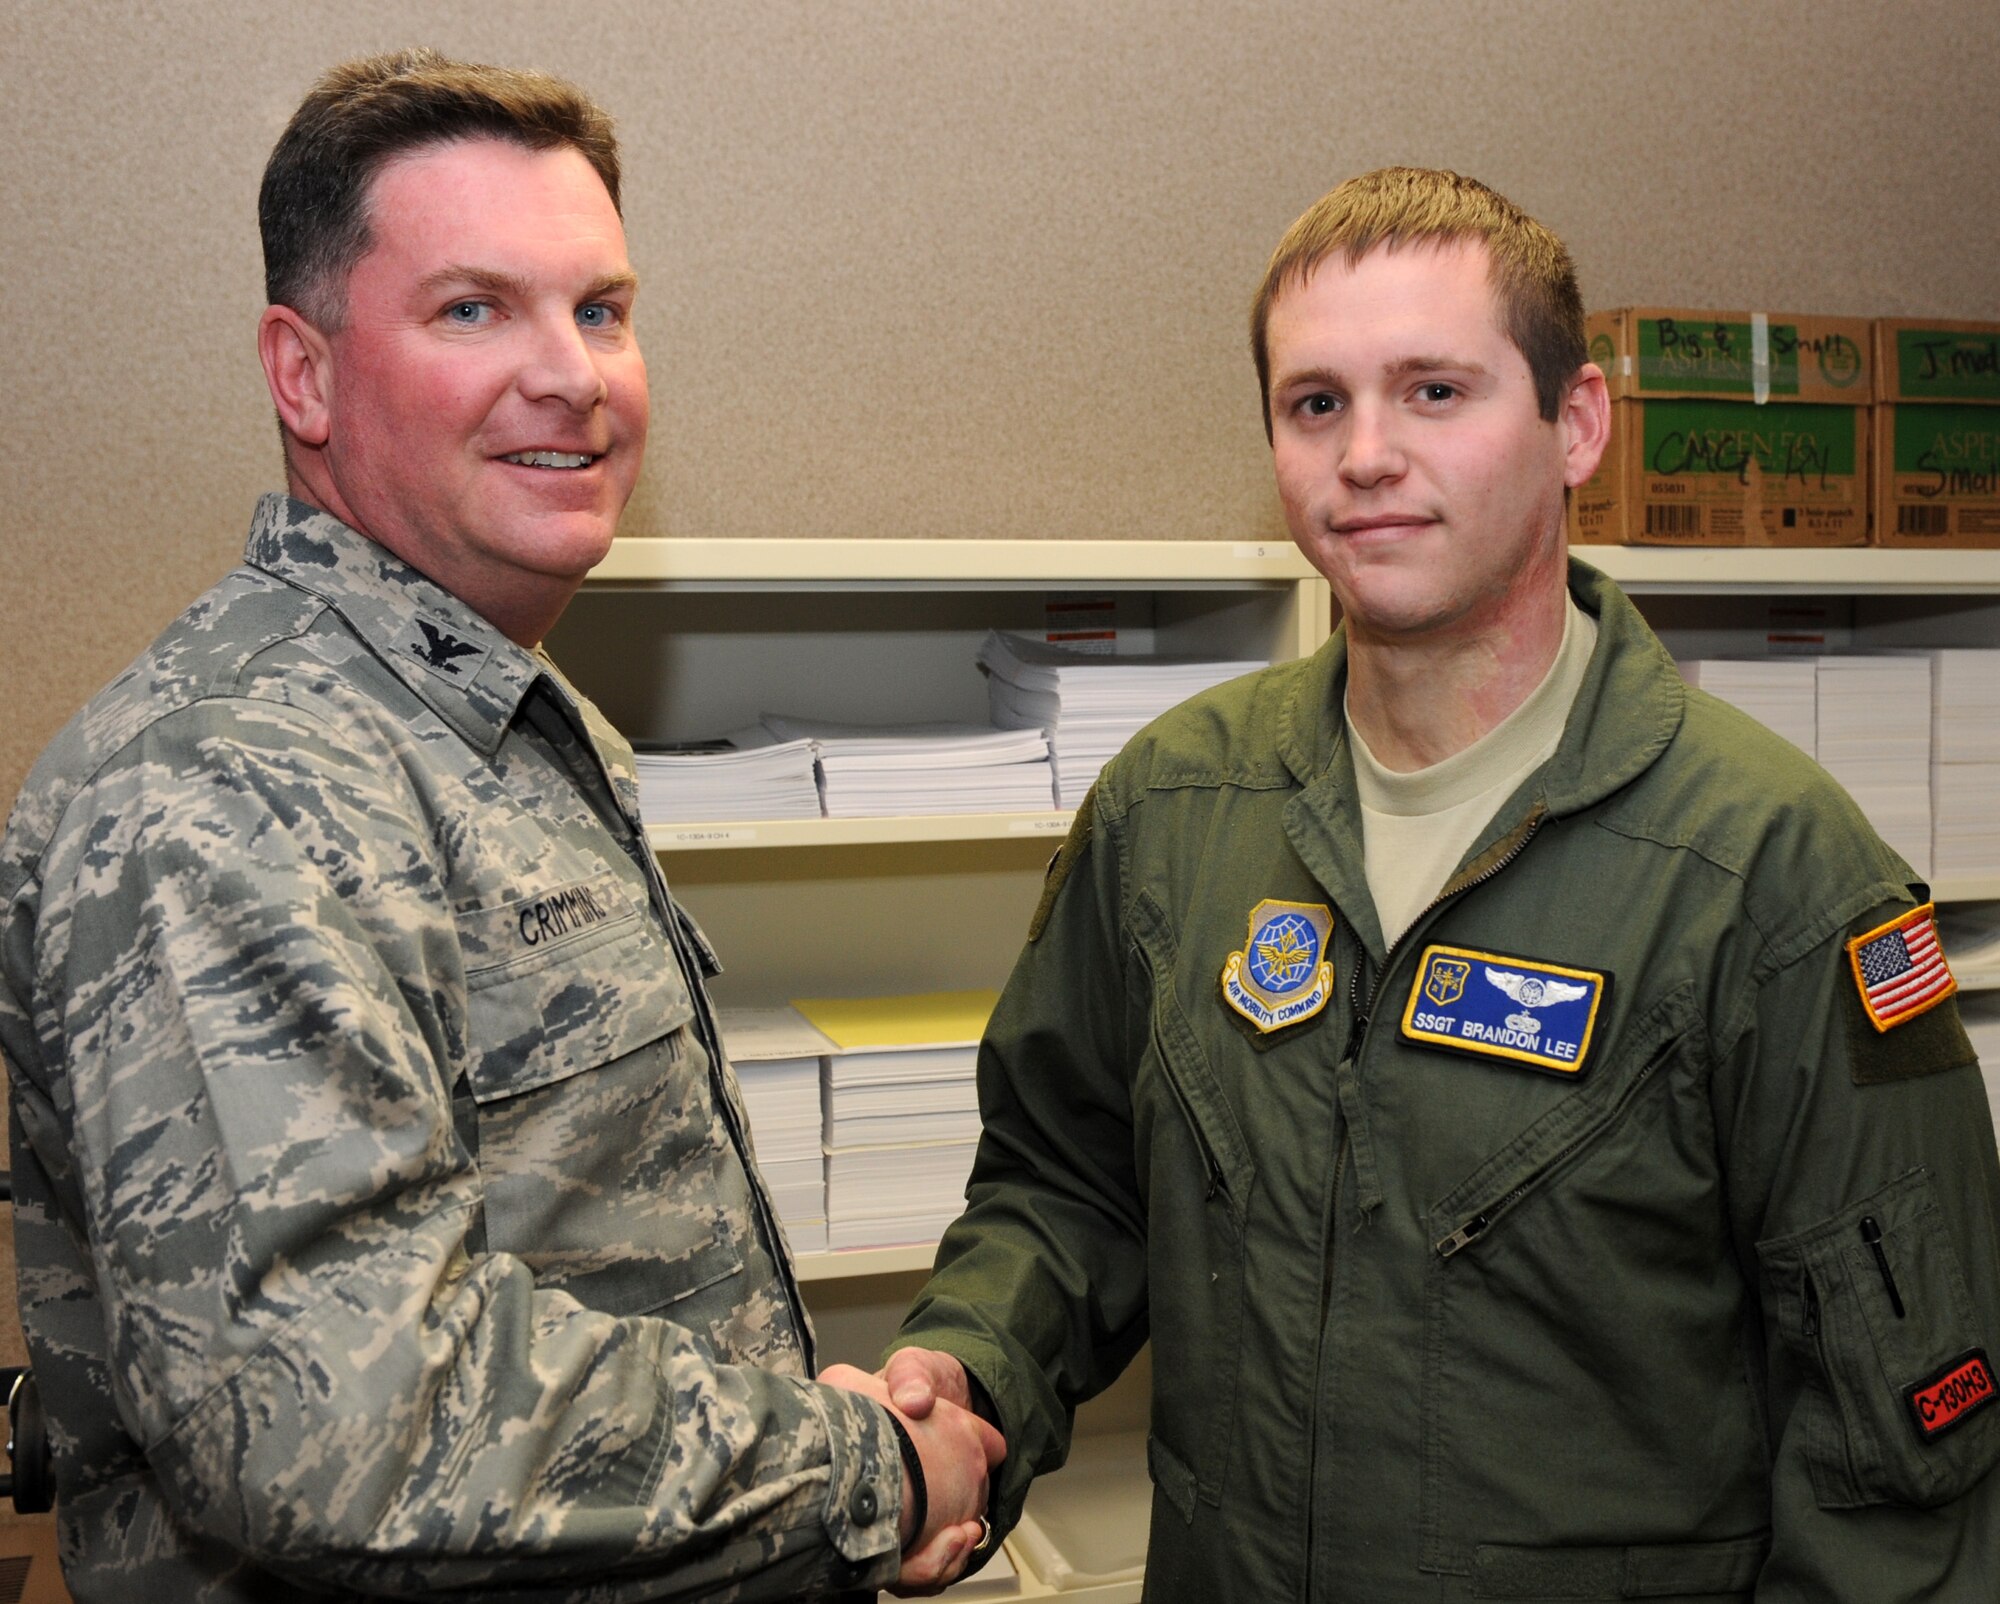 Col. Thomas Crimmins , 19th Airlift Wing vice commander, presents a commander’s coin to Staff Sgt. Brandon Lee, the 19th Operations Group flight engineer, Jan. 3, 2012, at Little Rock Air F orce Base, Ark. Lee, a Blackshear, Ga., native, has issued more than $23,000 worth of flight publications to squadrons around base. (U.S. Air Force photo by Airman 1st Class Rusty Frank)